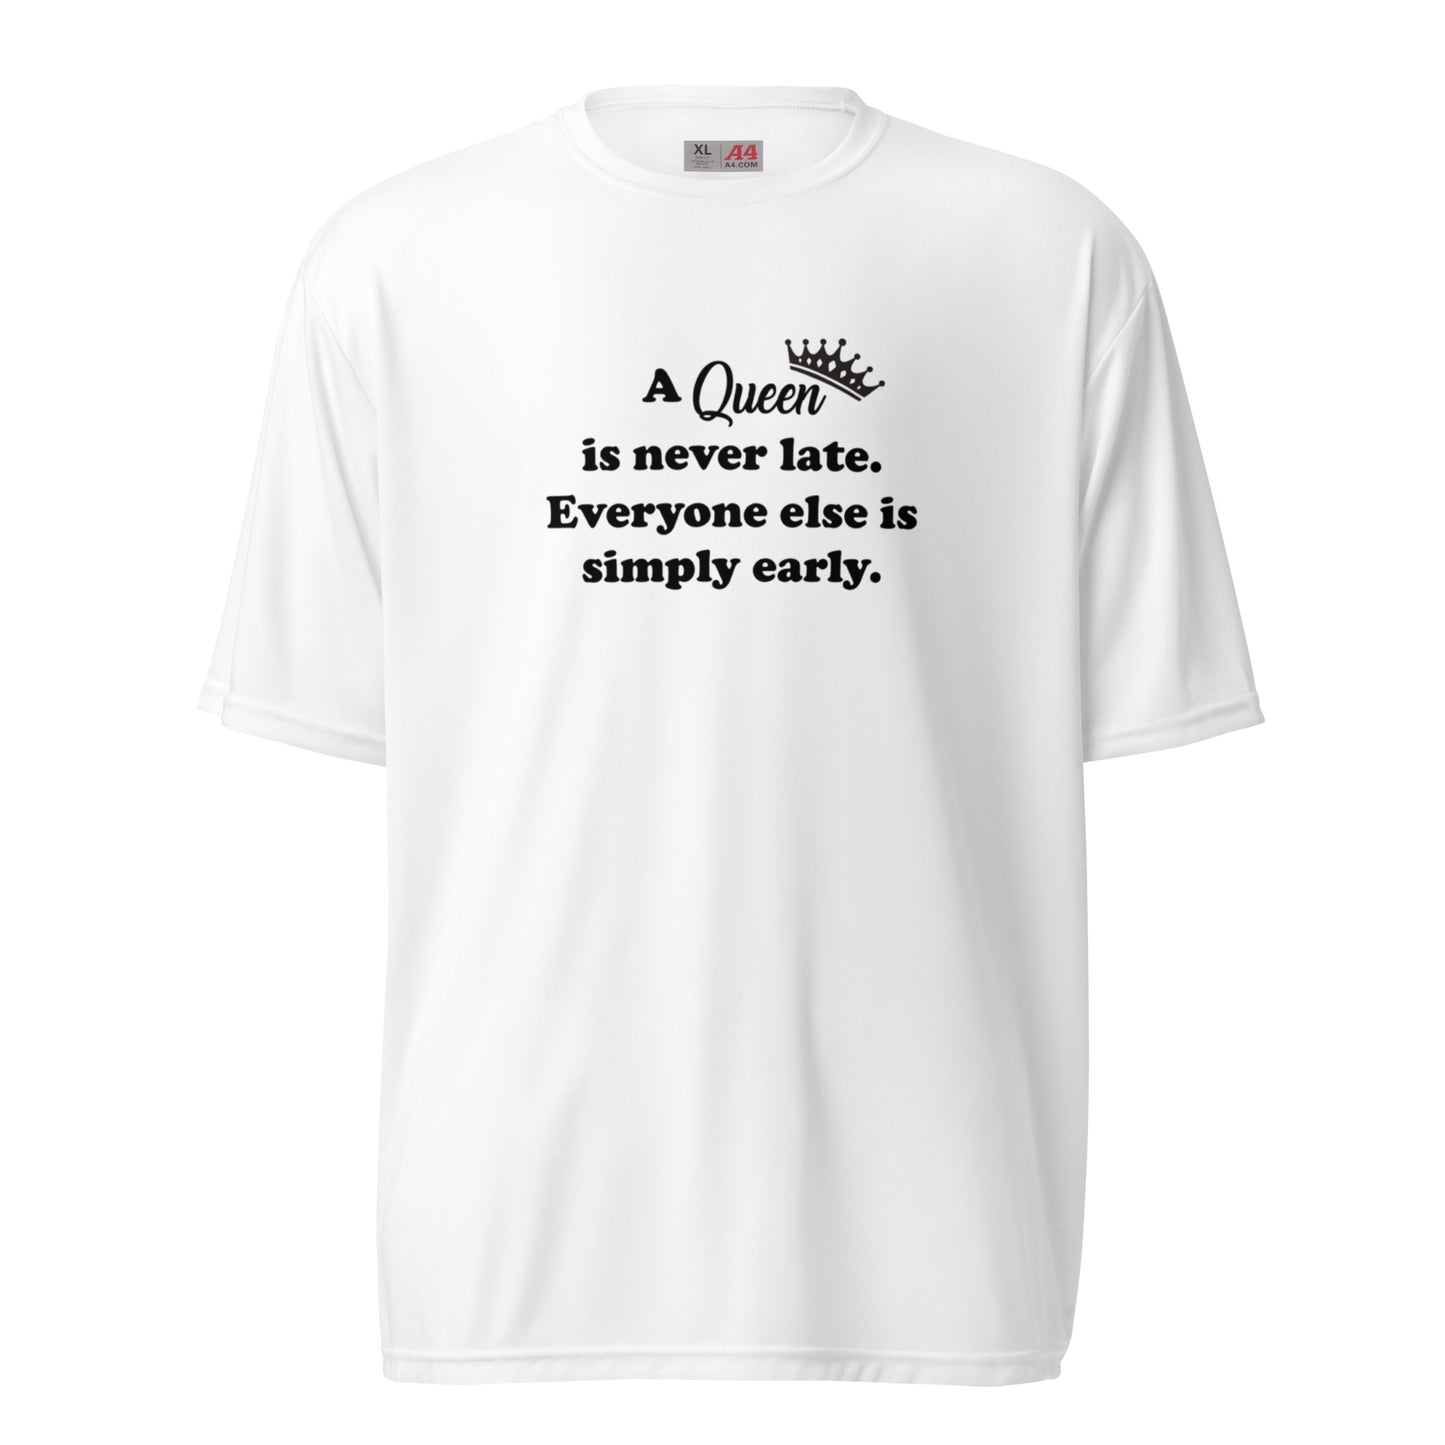 A Queen is Never Late Unisex performance crew neck t-shirt - Black Print